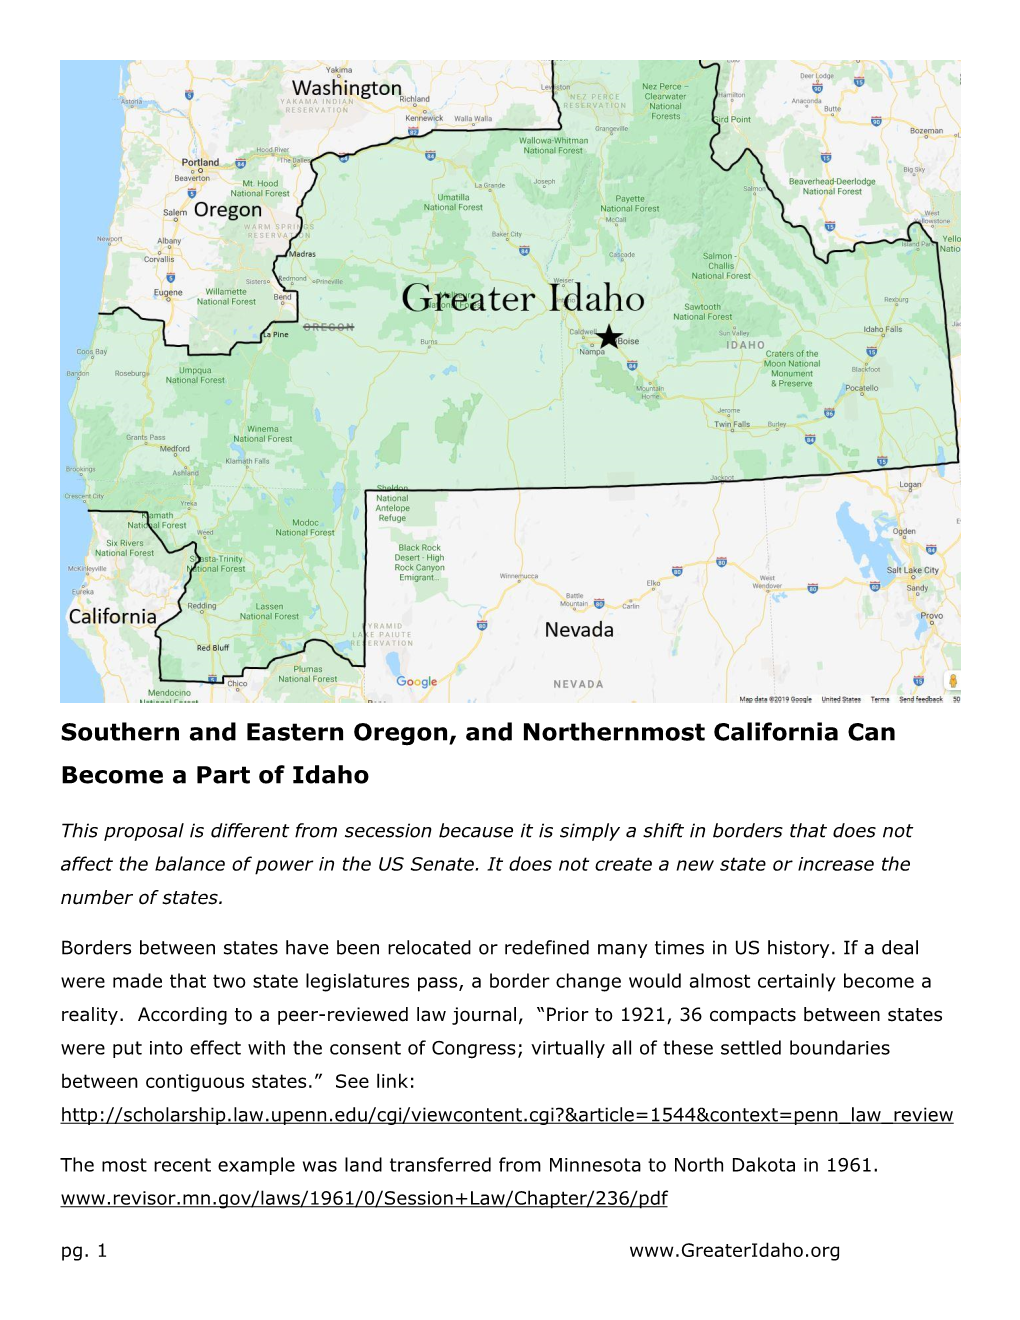 Southern and Eastern Oregon, and Northernmost California Can Become a Part of Idaho